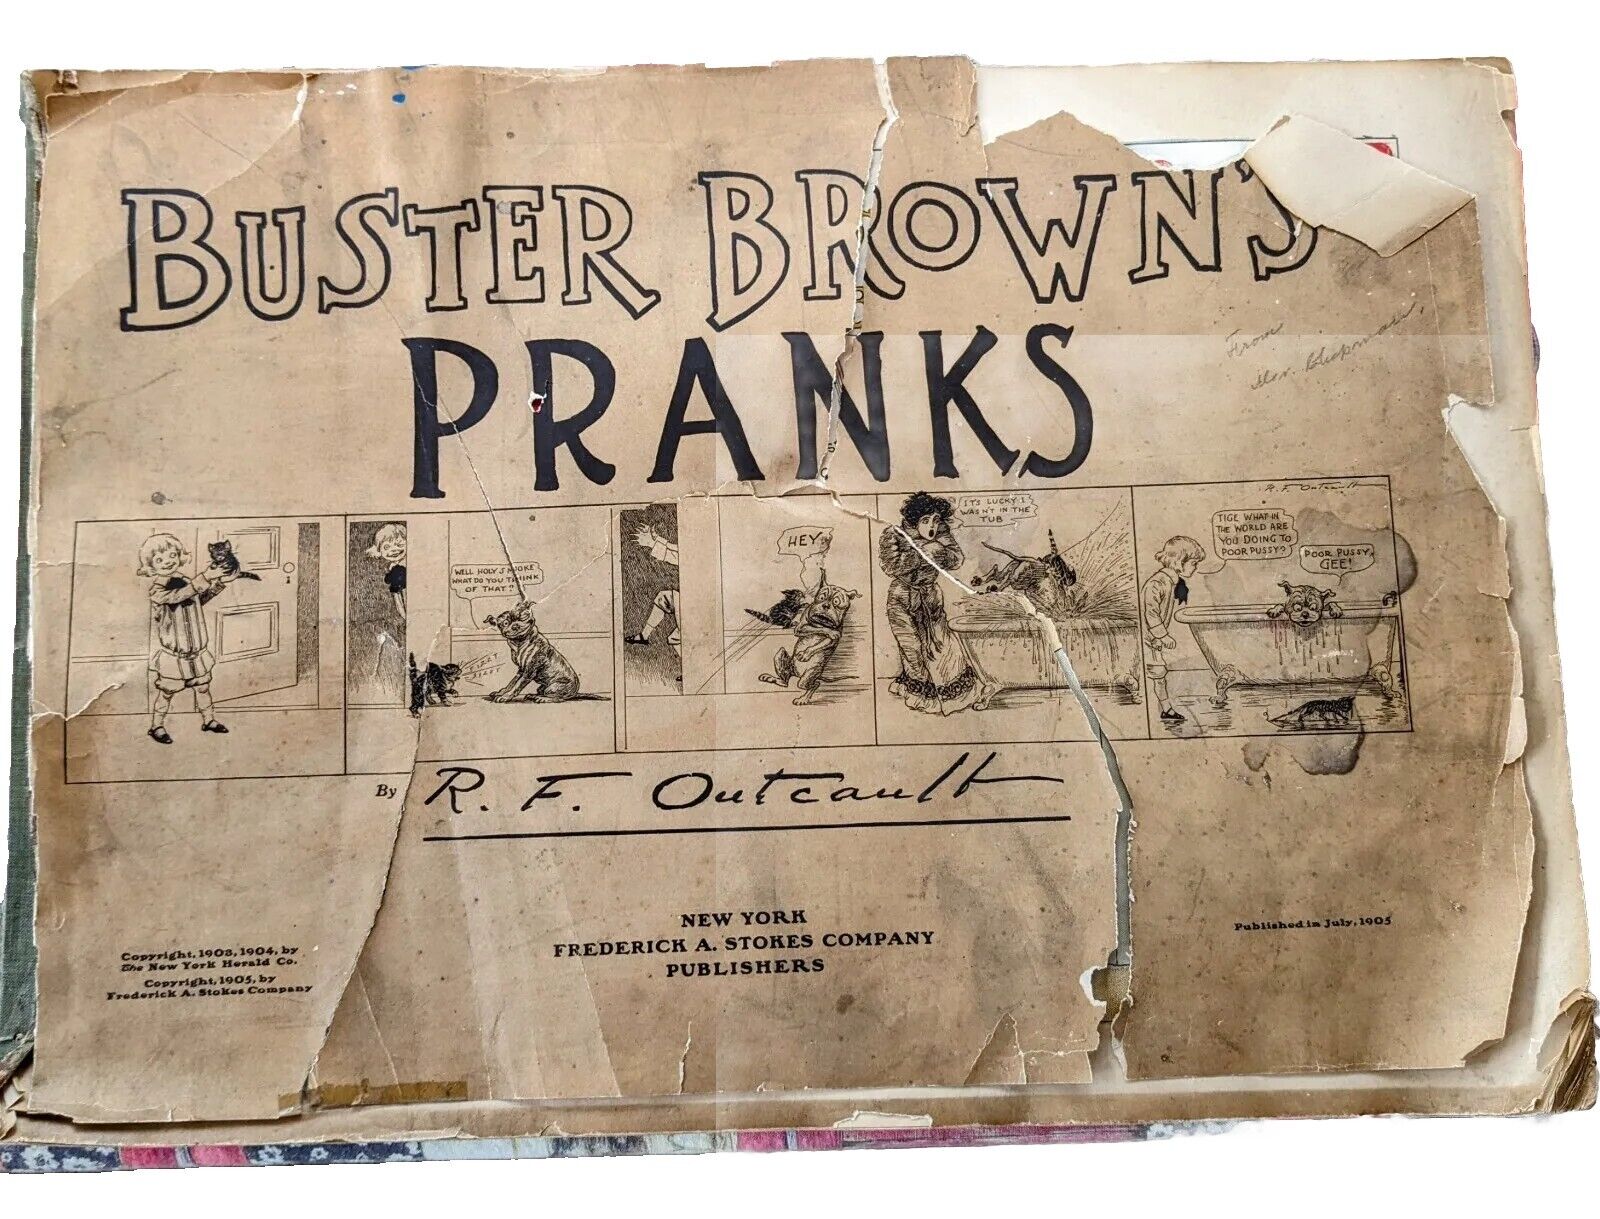 Antique Rare Buster Brown Pranks July 1905 by R. F. Outcault Book